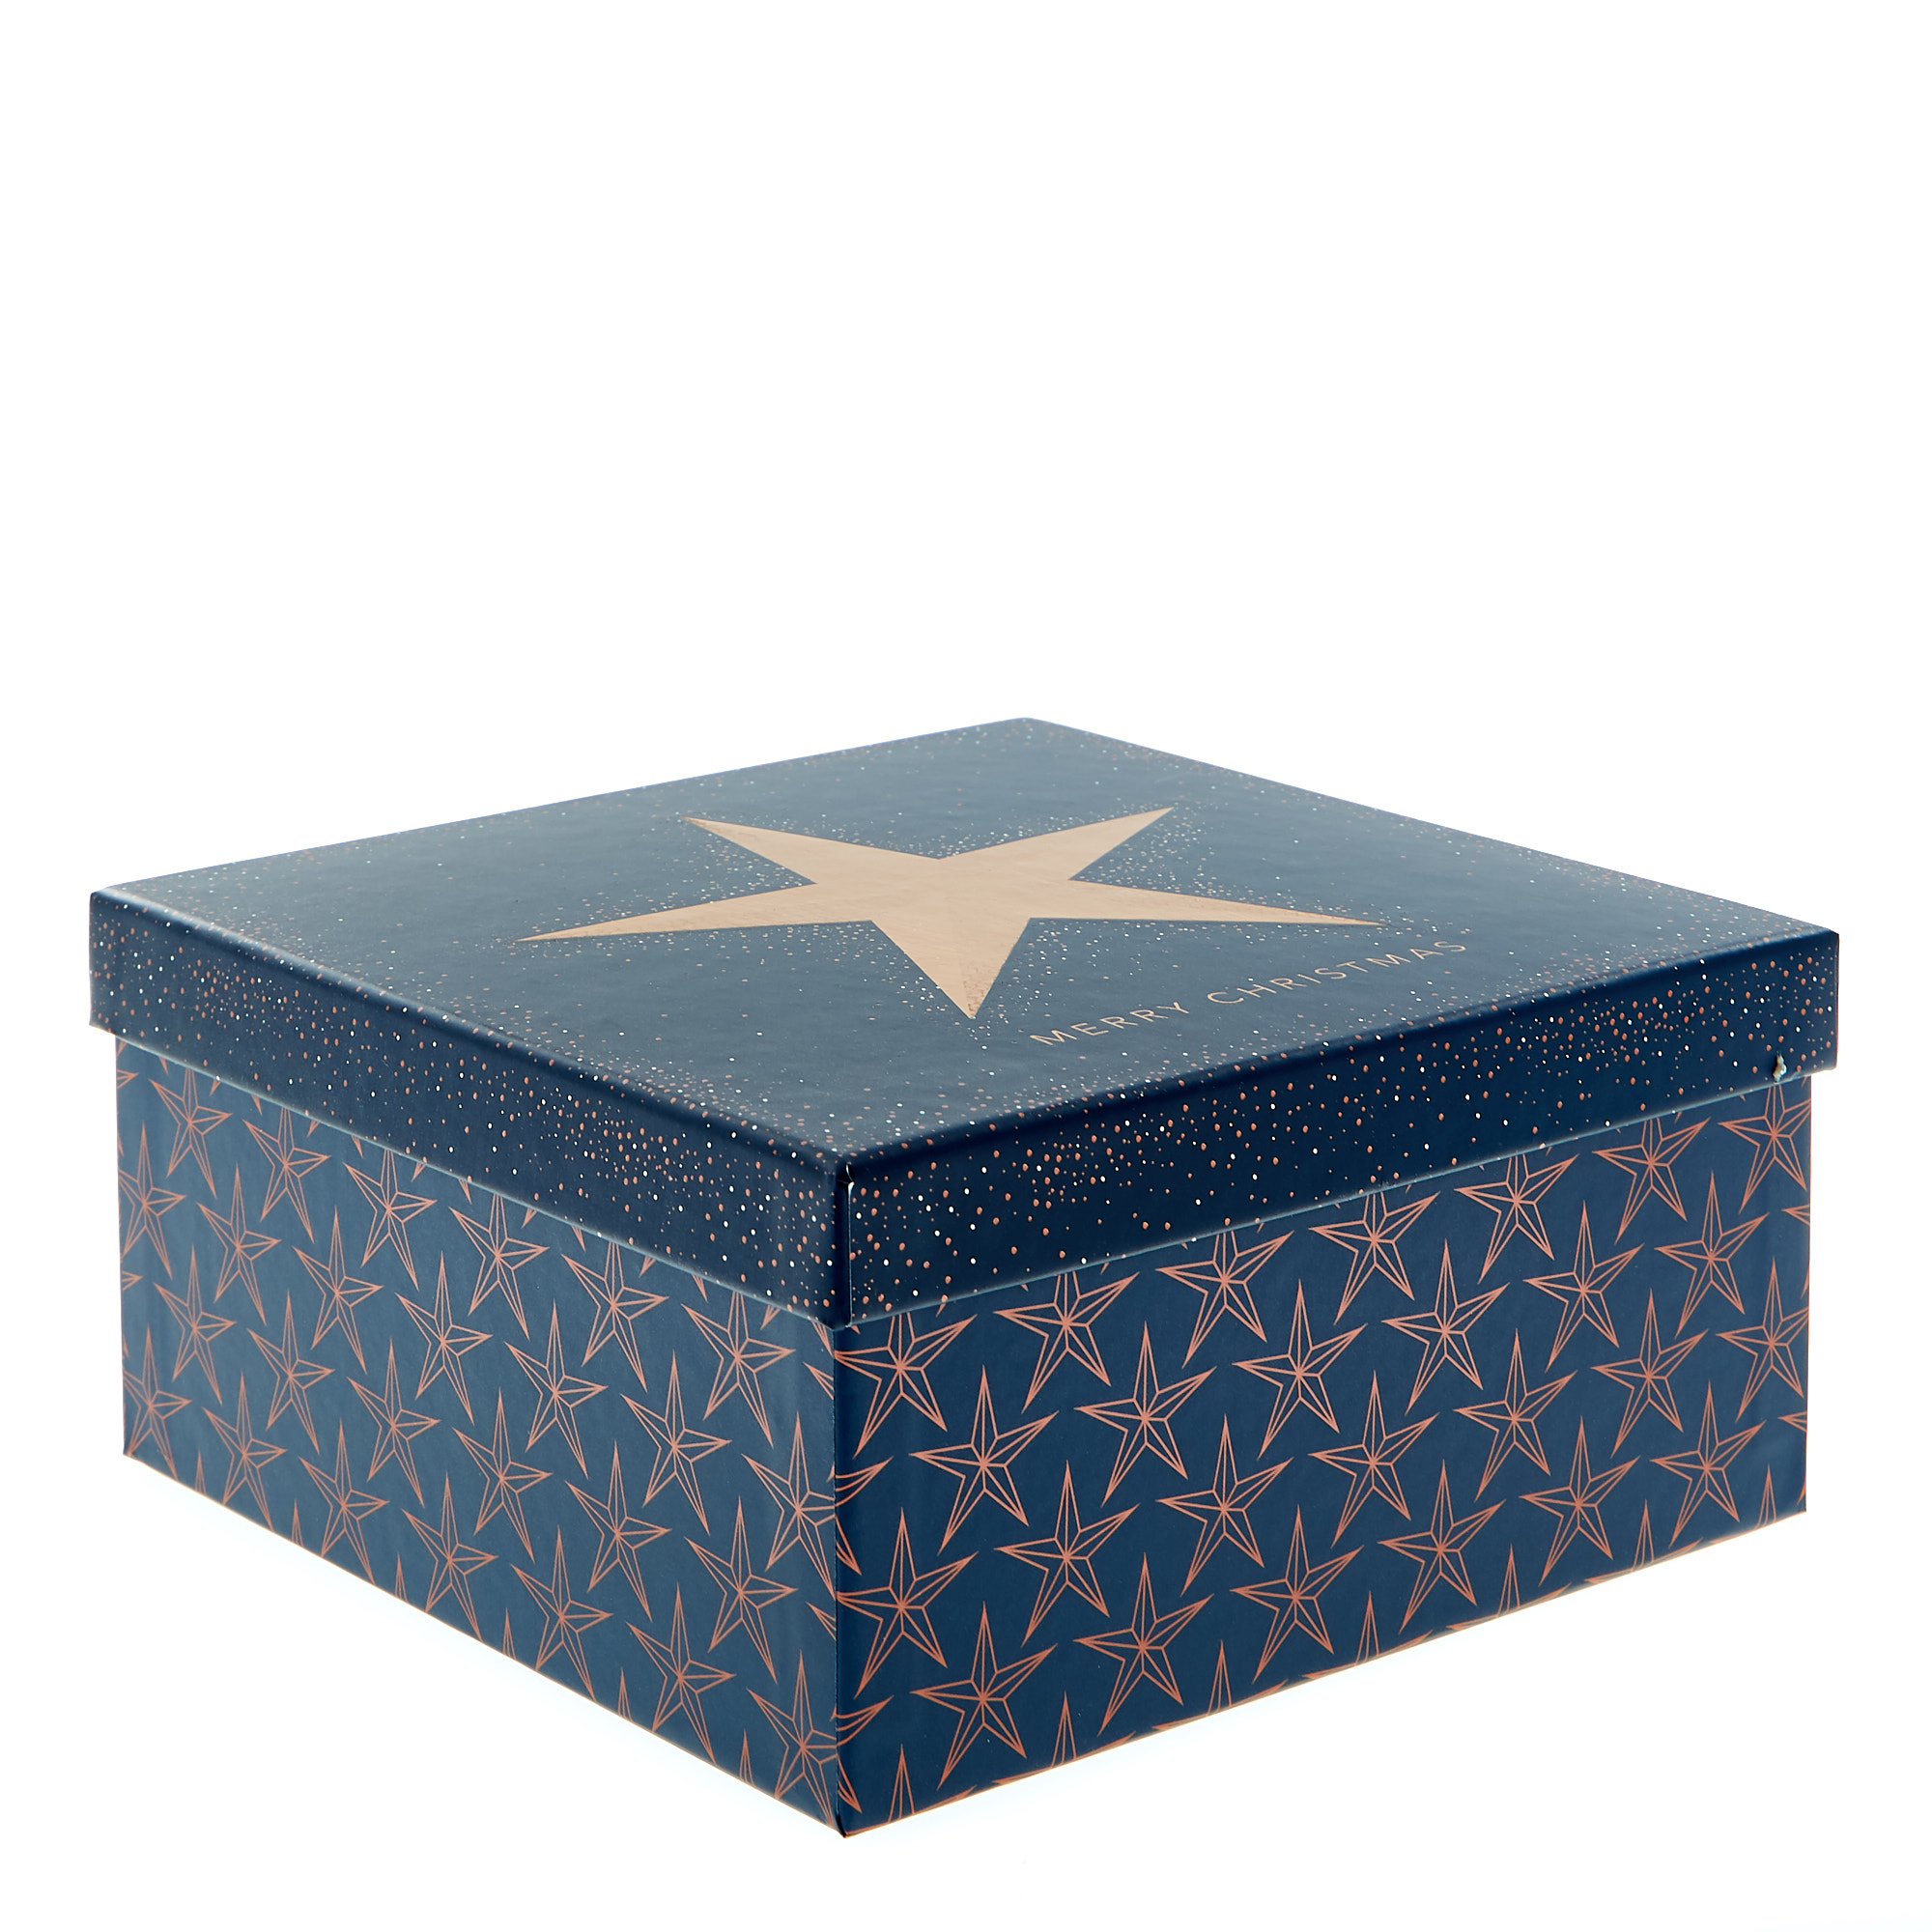 Navy Copper Star Square Gift Boxes - Set of 3